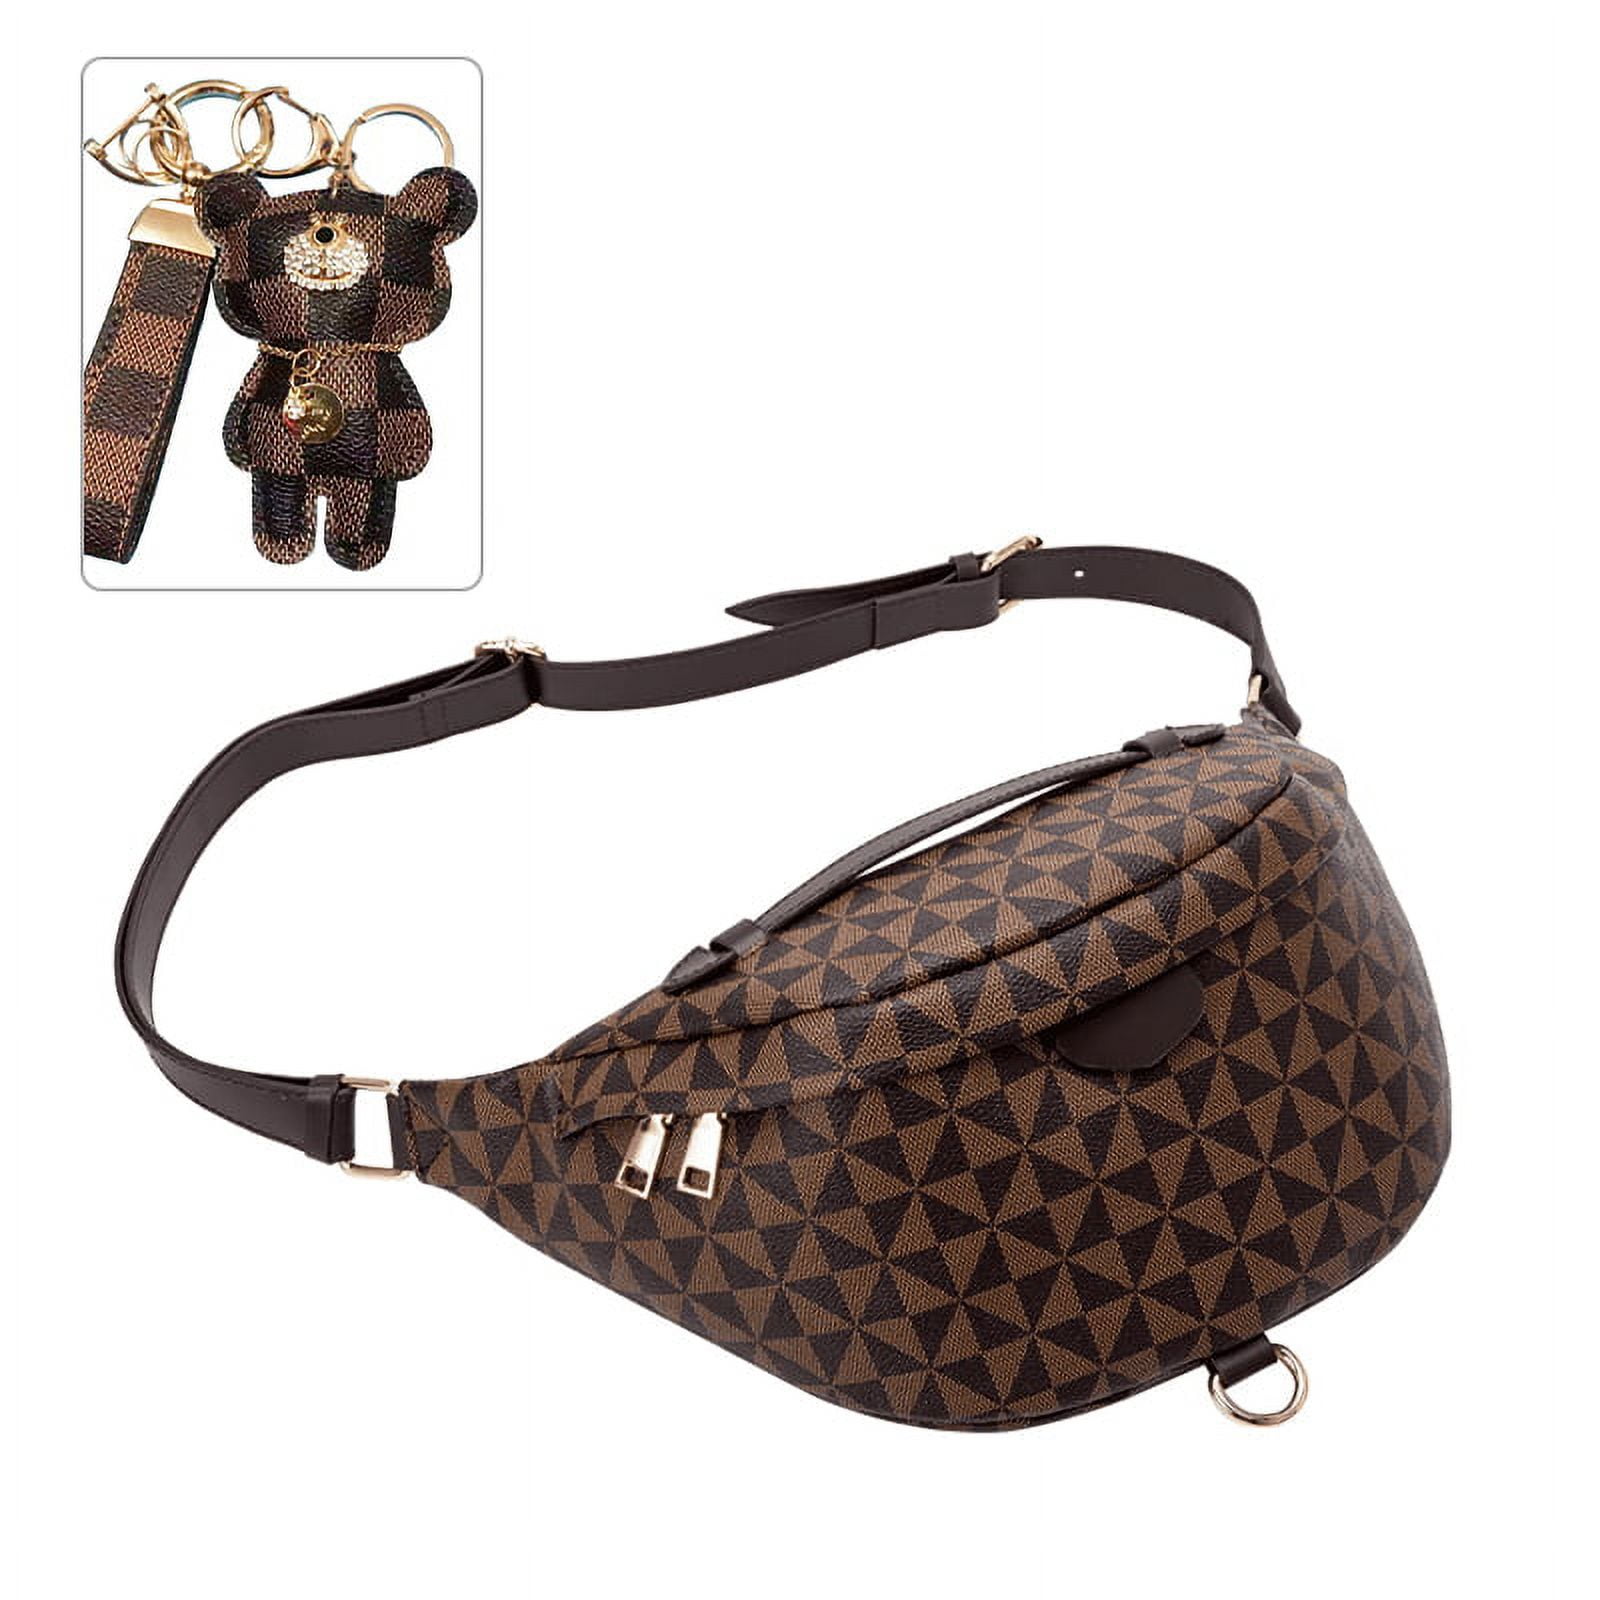 Zsoznqaky Triangle Brown Checkered Fanny Pack with Handle Womens Checkered Sling Purse Checkered Cross Body Waist Bag Crossbody Waist Pack Fashion